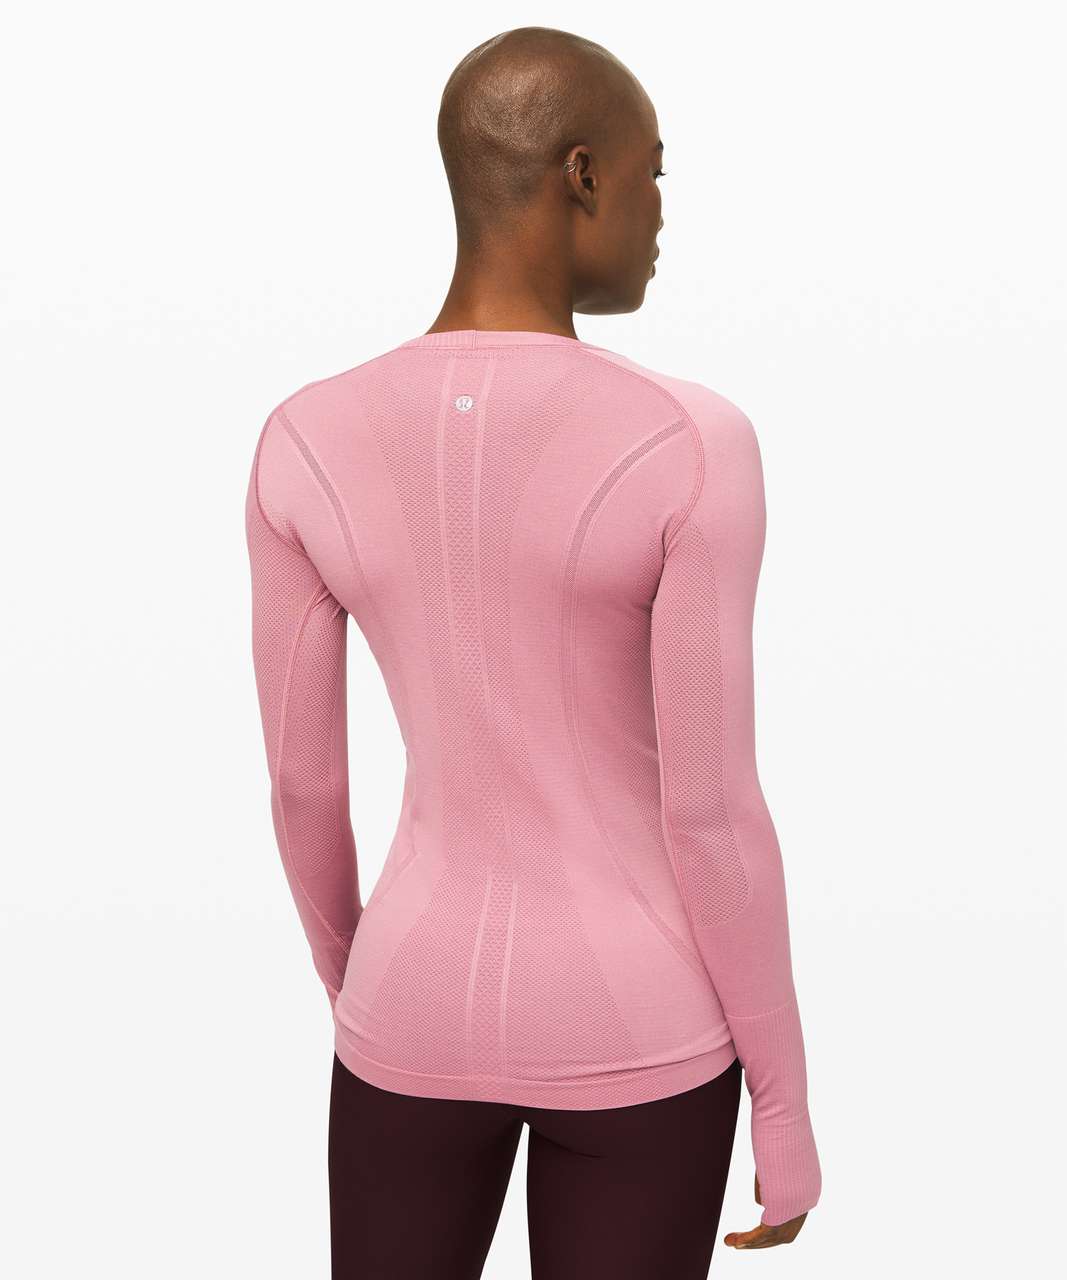 Lululemon Swiftly Tech Long Sleeve Crew - Pink Taupe / Pink Taupe